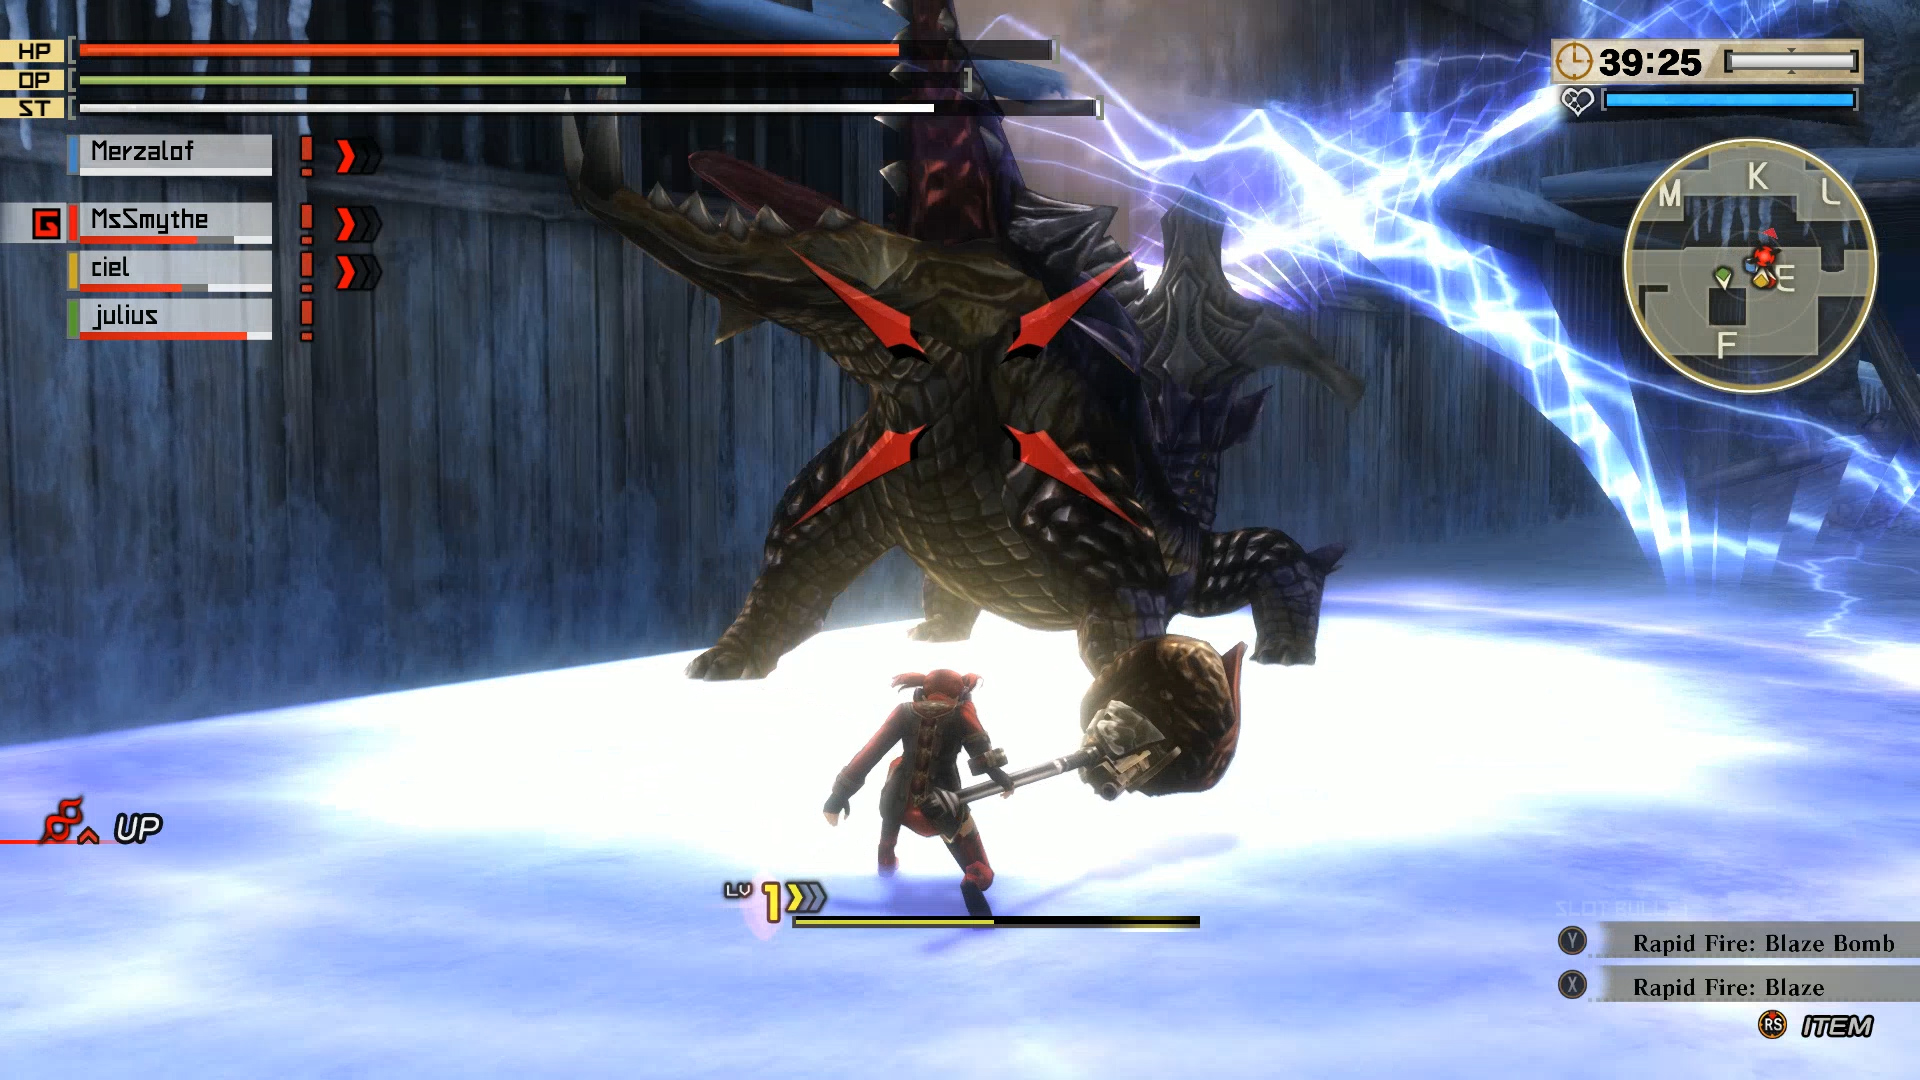 Co-Optimus - Review - God Eater 2: Rage Burst Co-Op Review